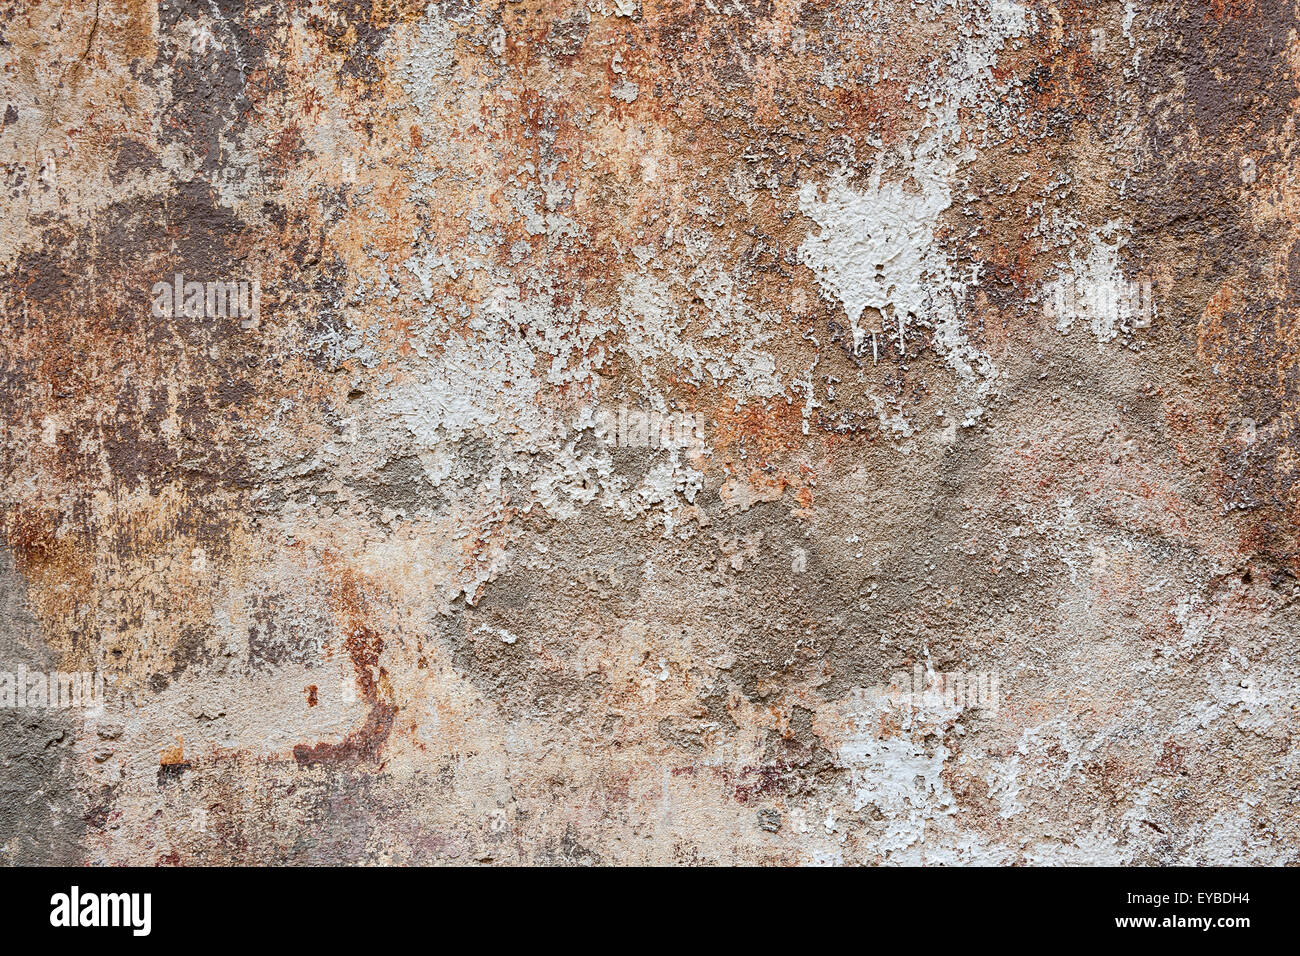 Abstract background of old painted plastered wall with peeling paint texture in brown, grey, and orange colors Stock Photo